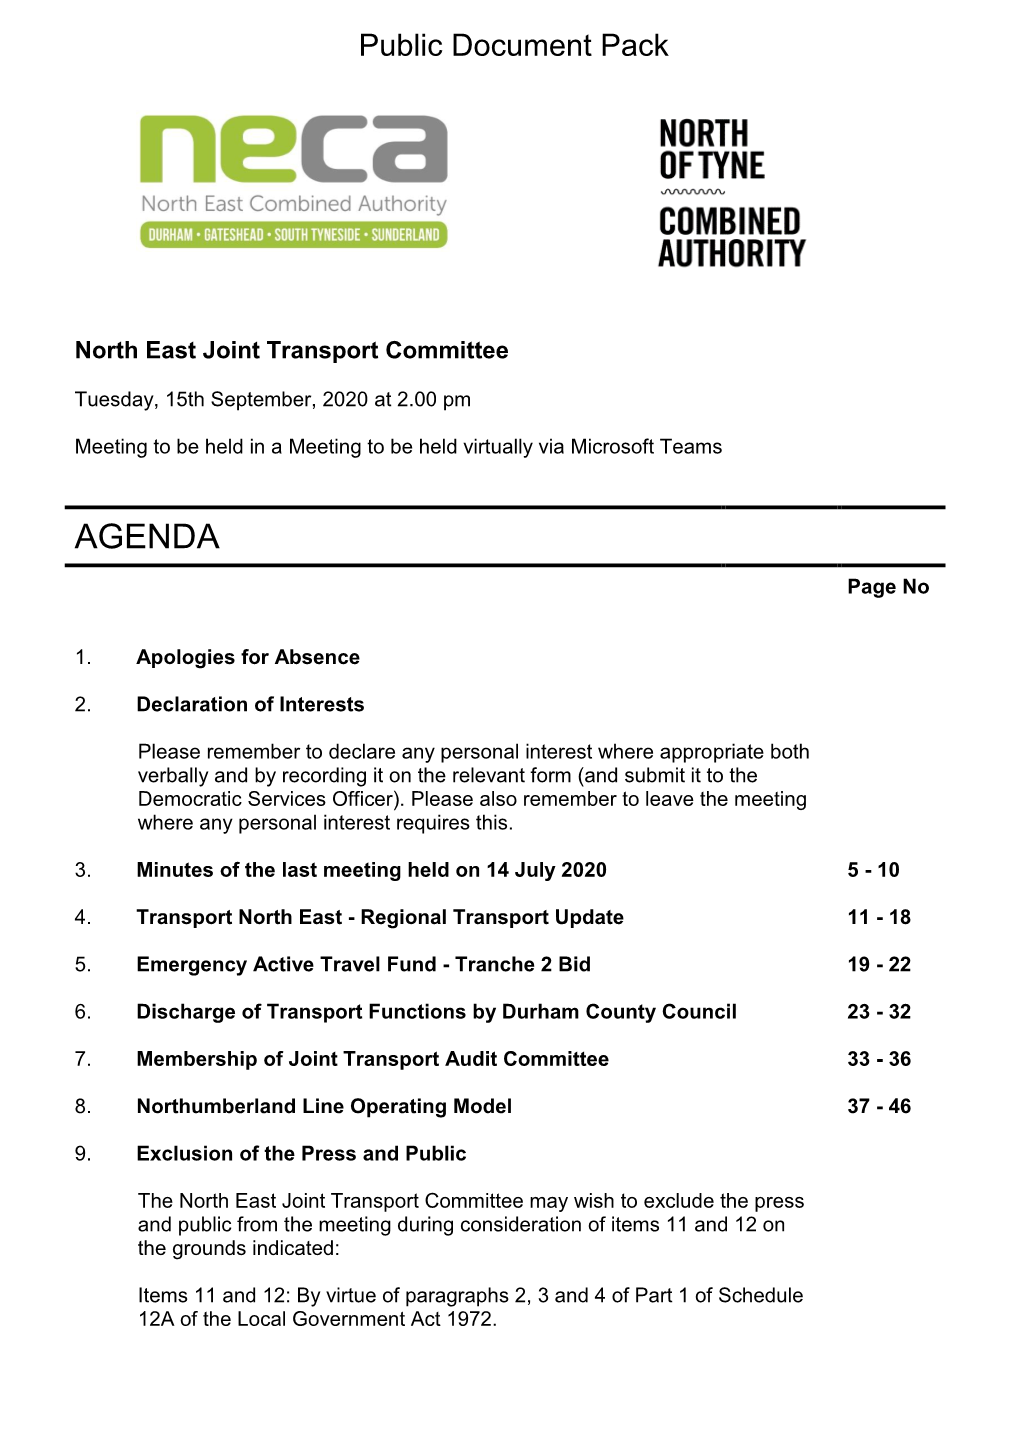 Agenda Document for North East Joint Transport Committee, 15/09/2020